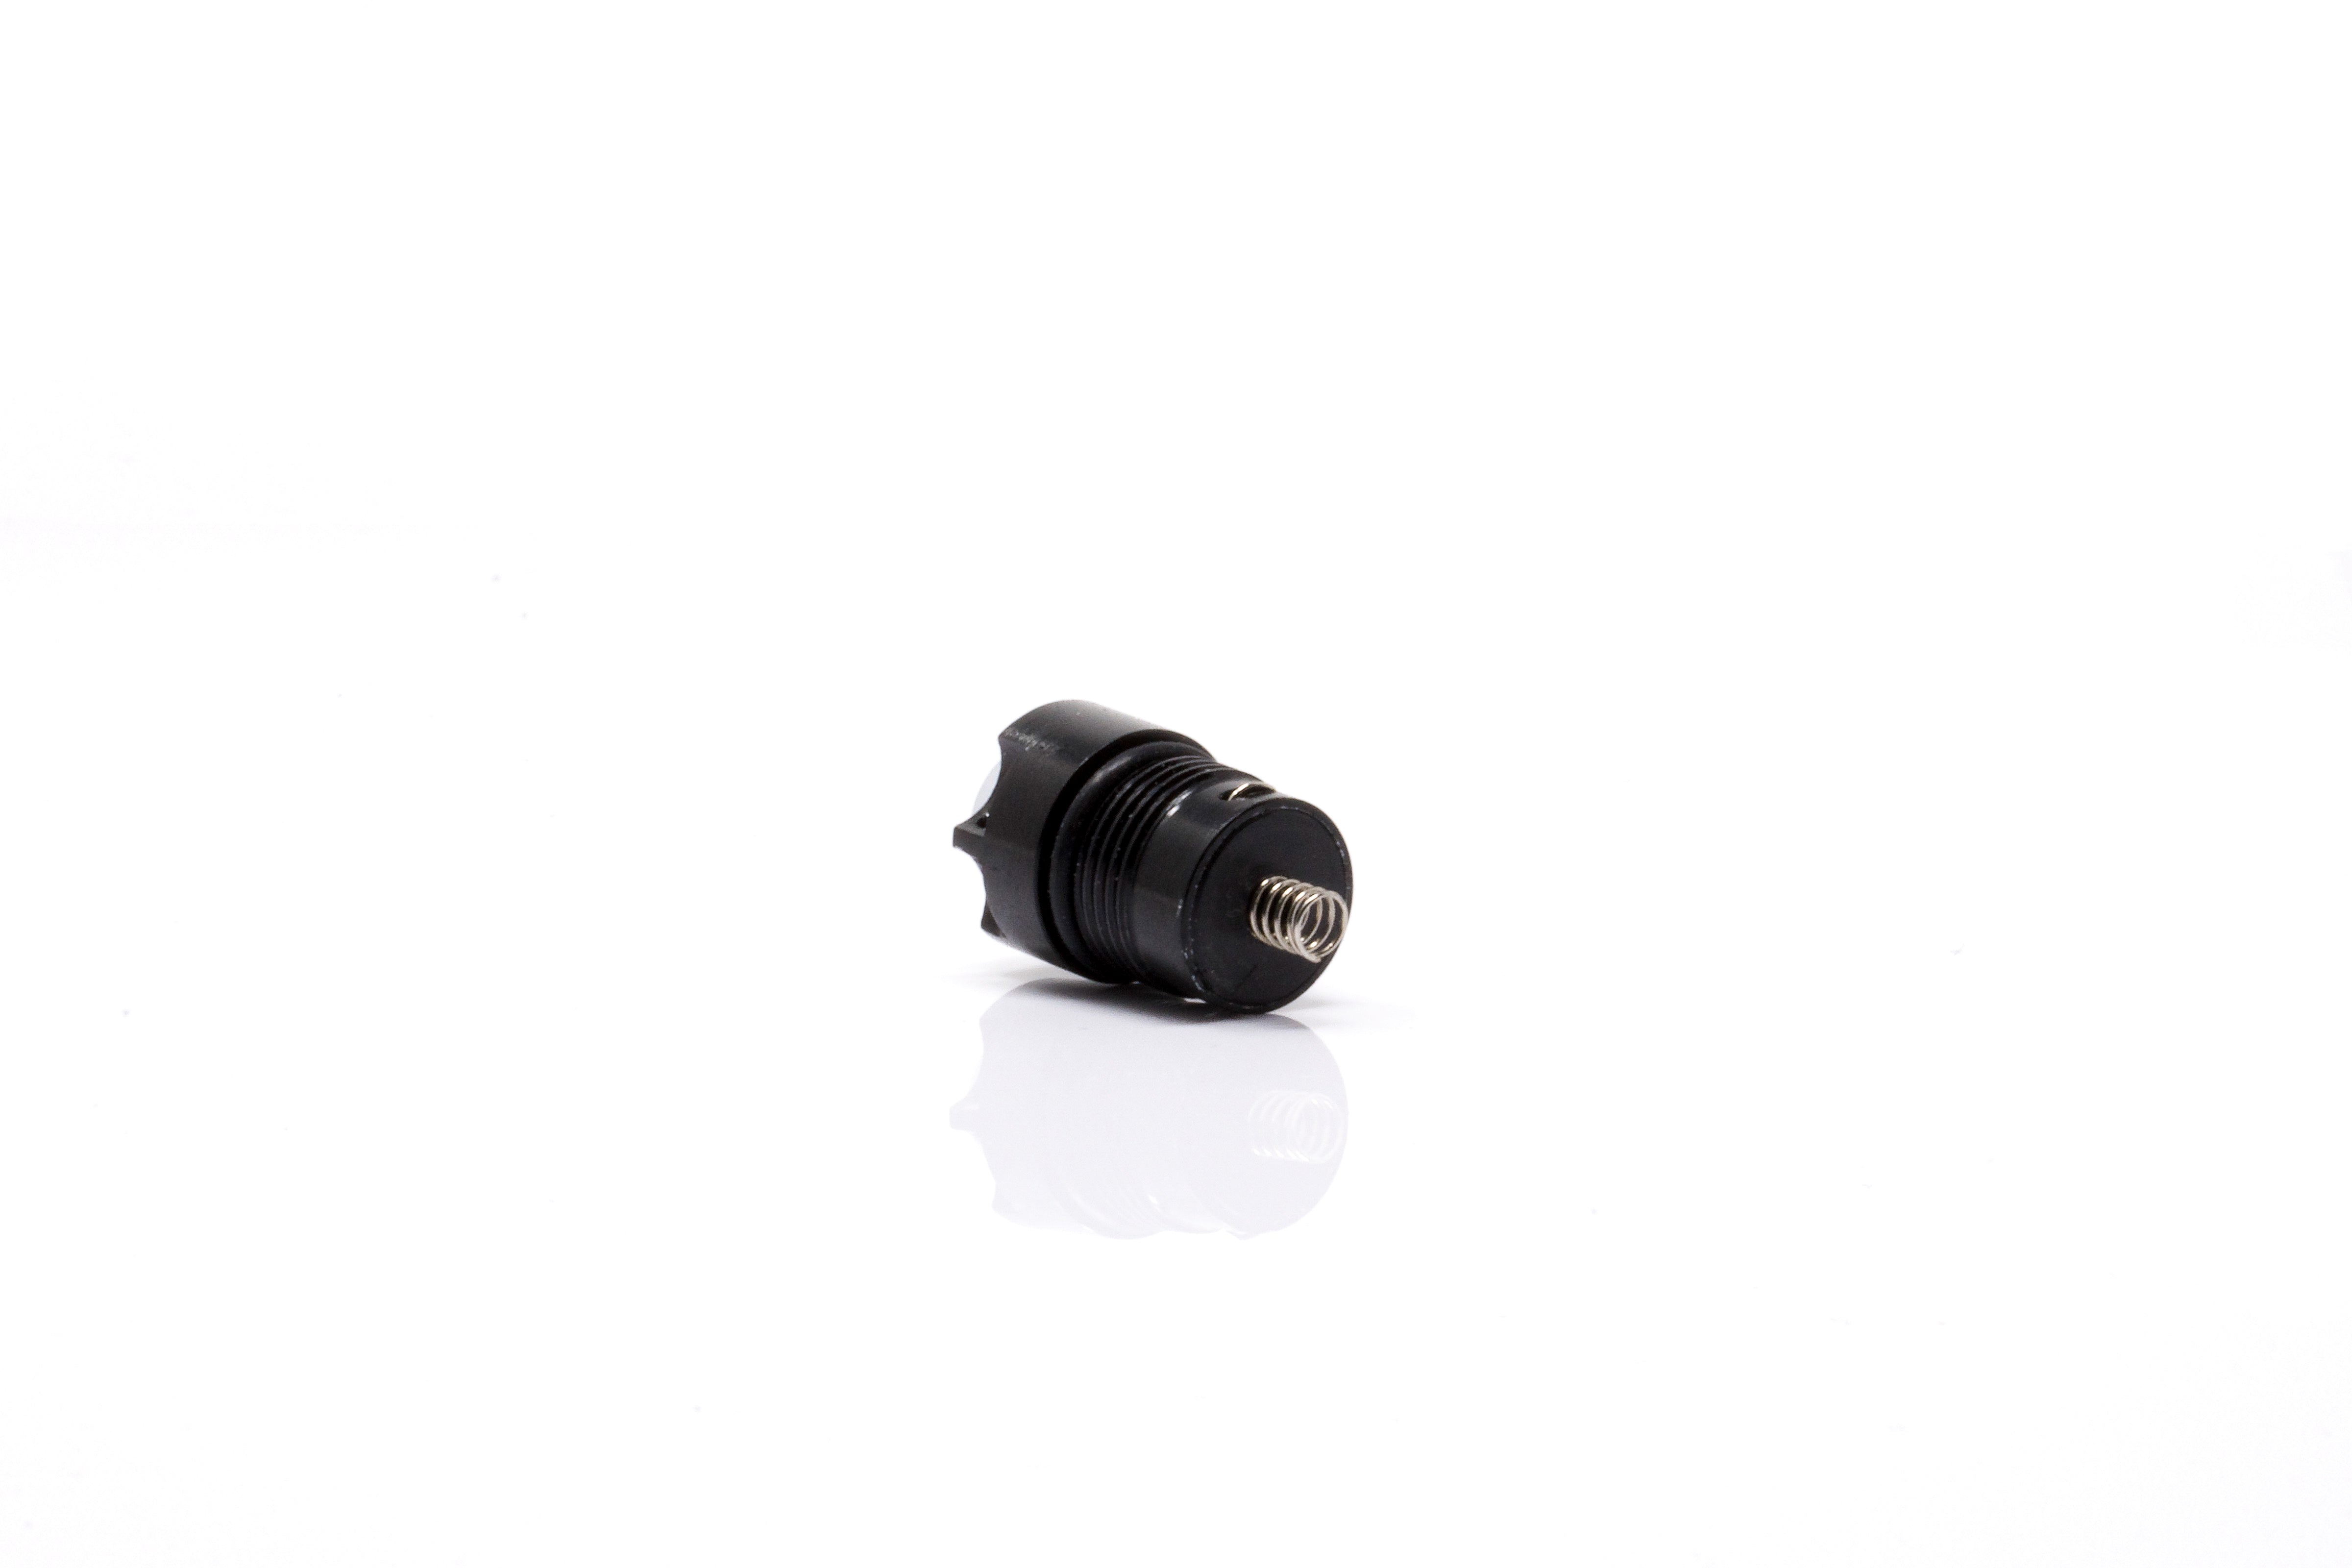 Maglite Tail Cap Switches